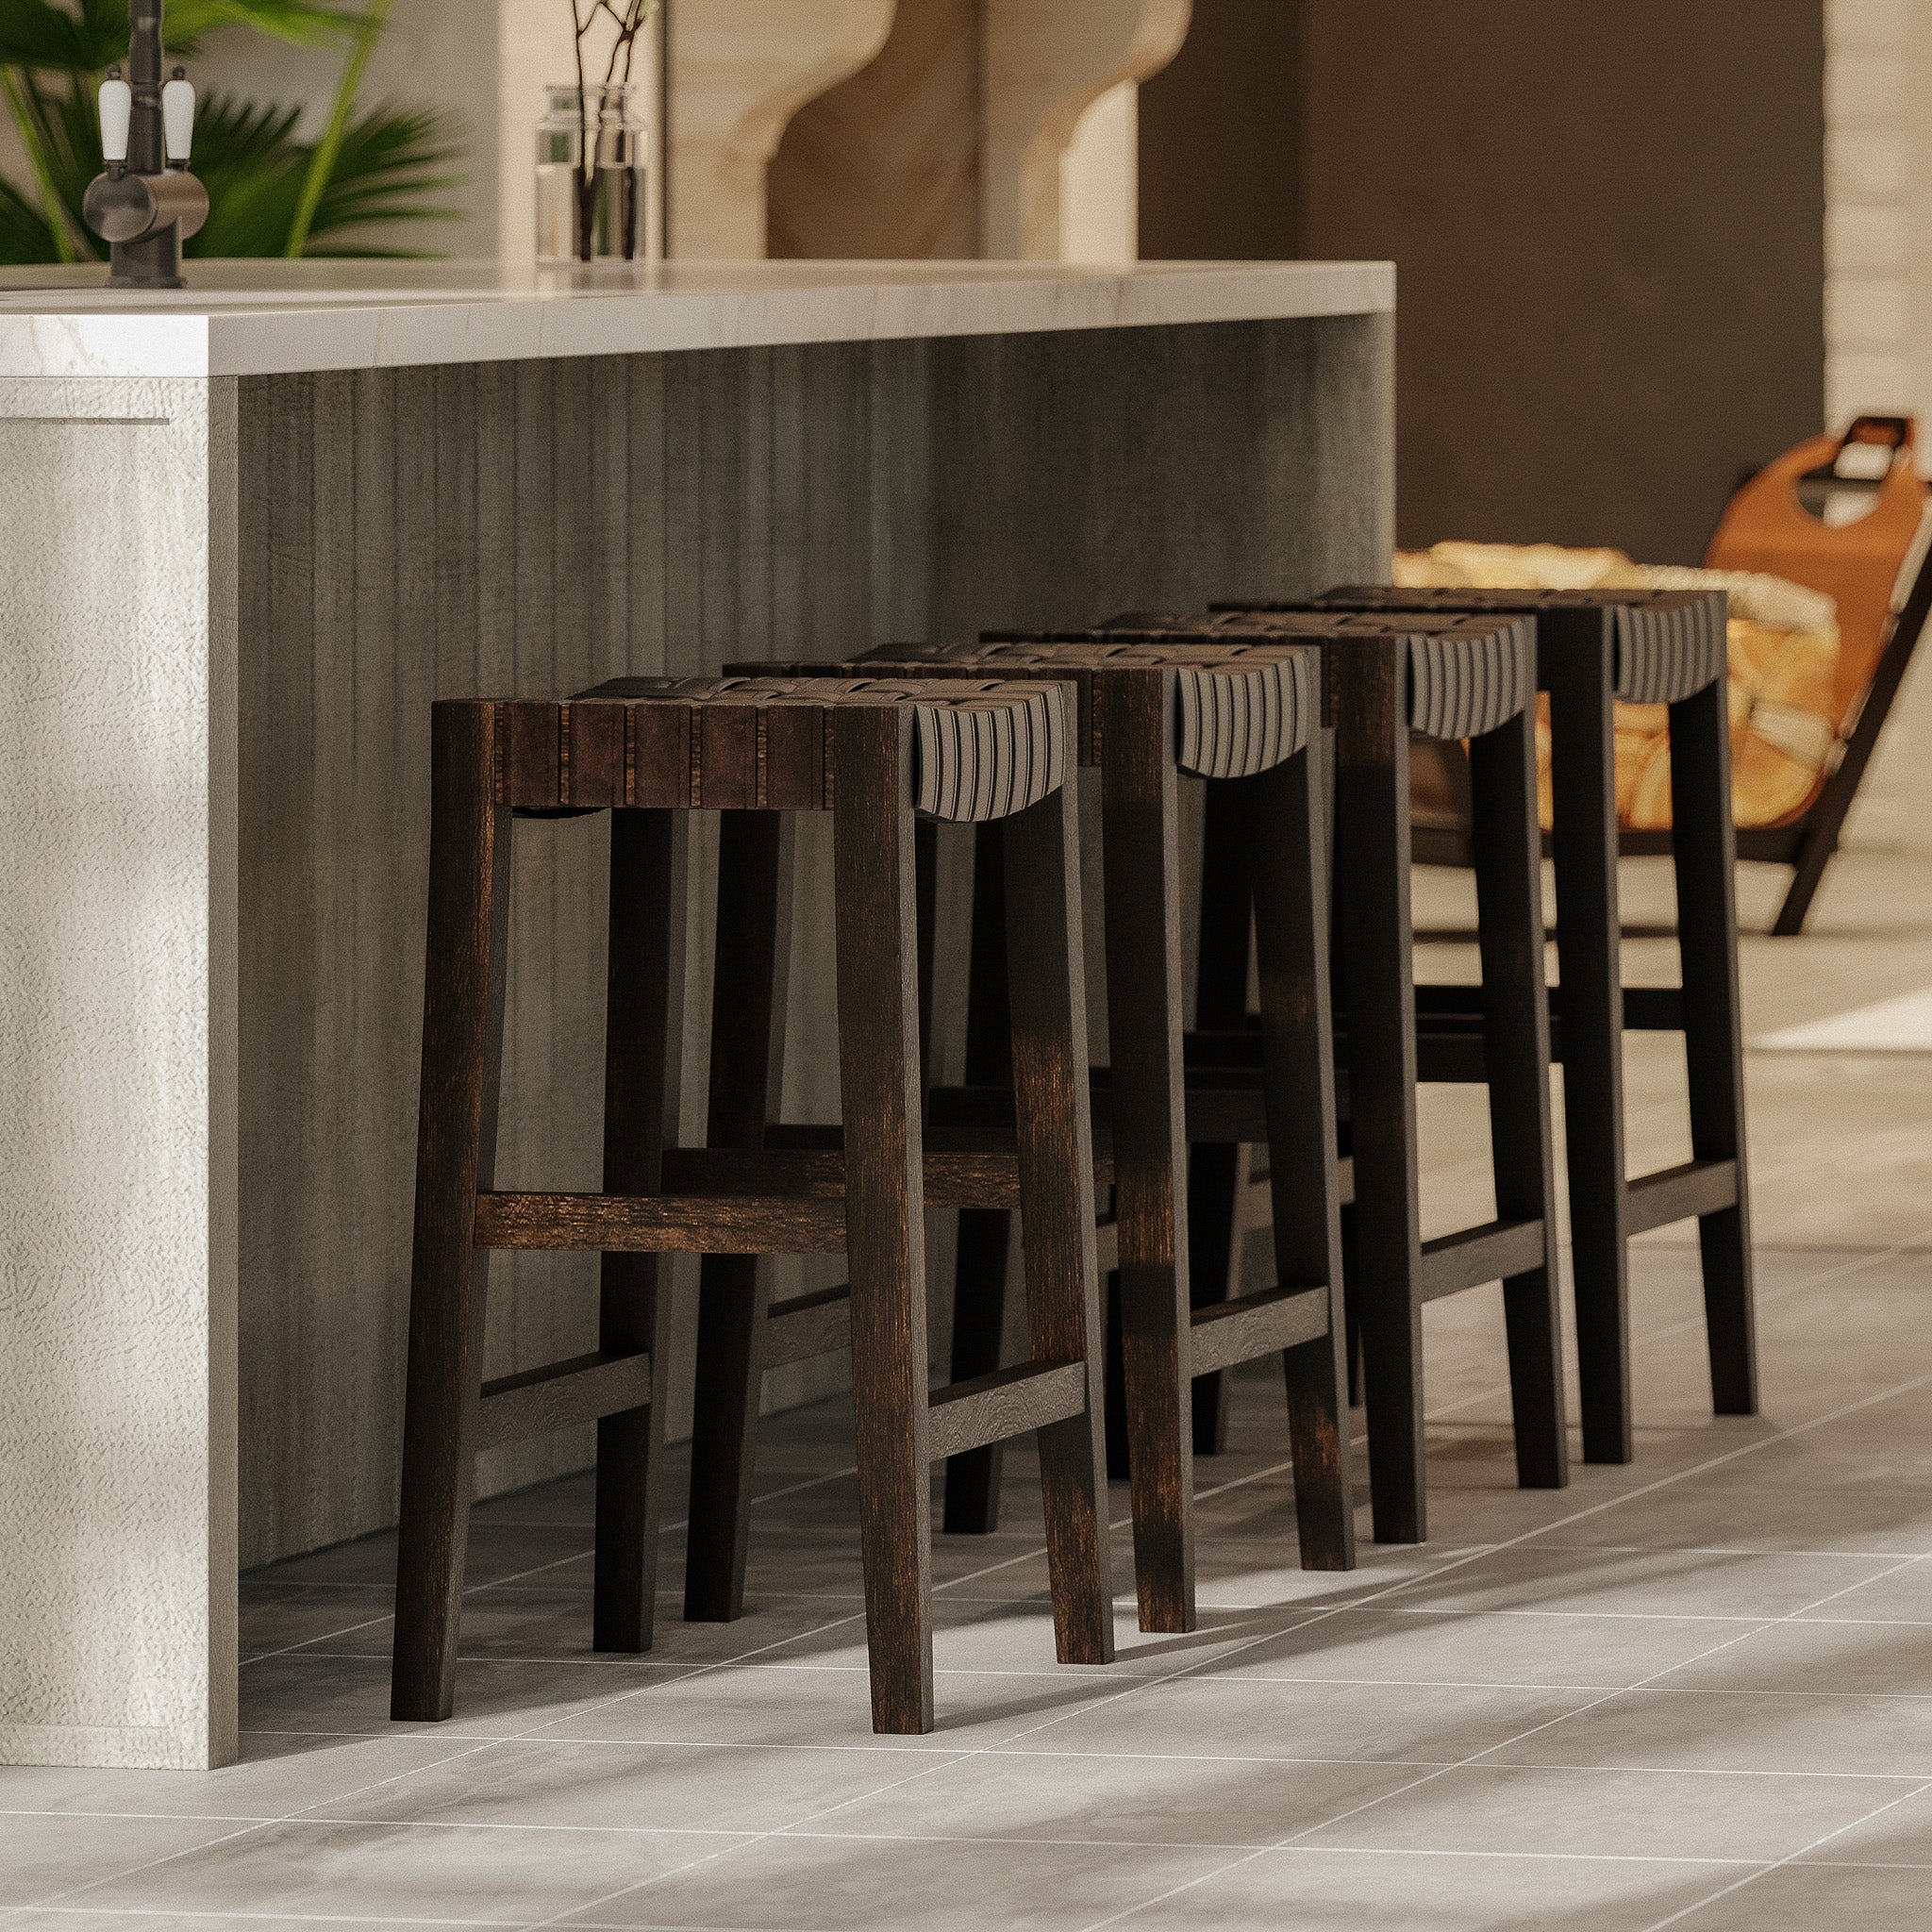 Emerson Counter Stool in Weathered Brown Wood Finish with Marksman Saddle Vegan Leather in Stools by Maven Lane